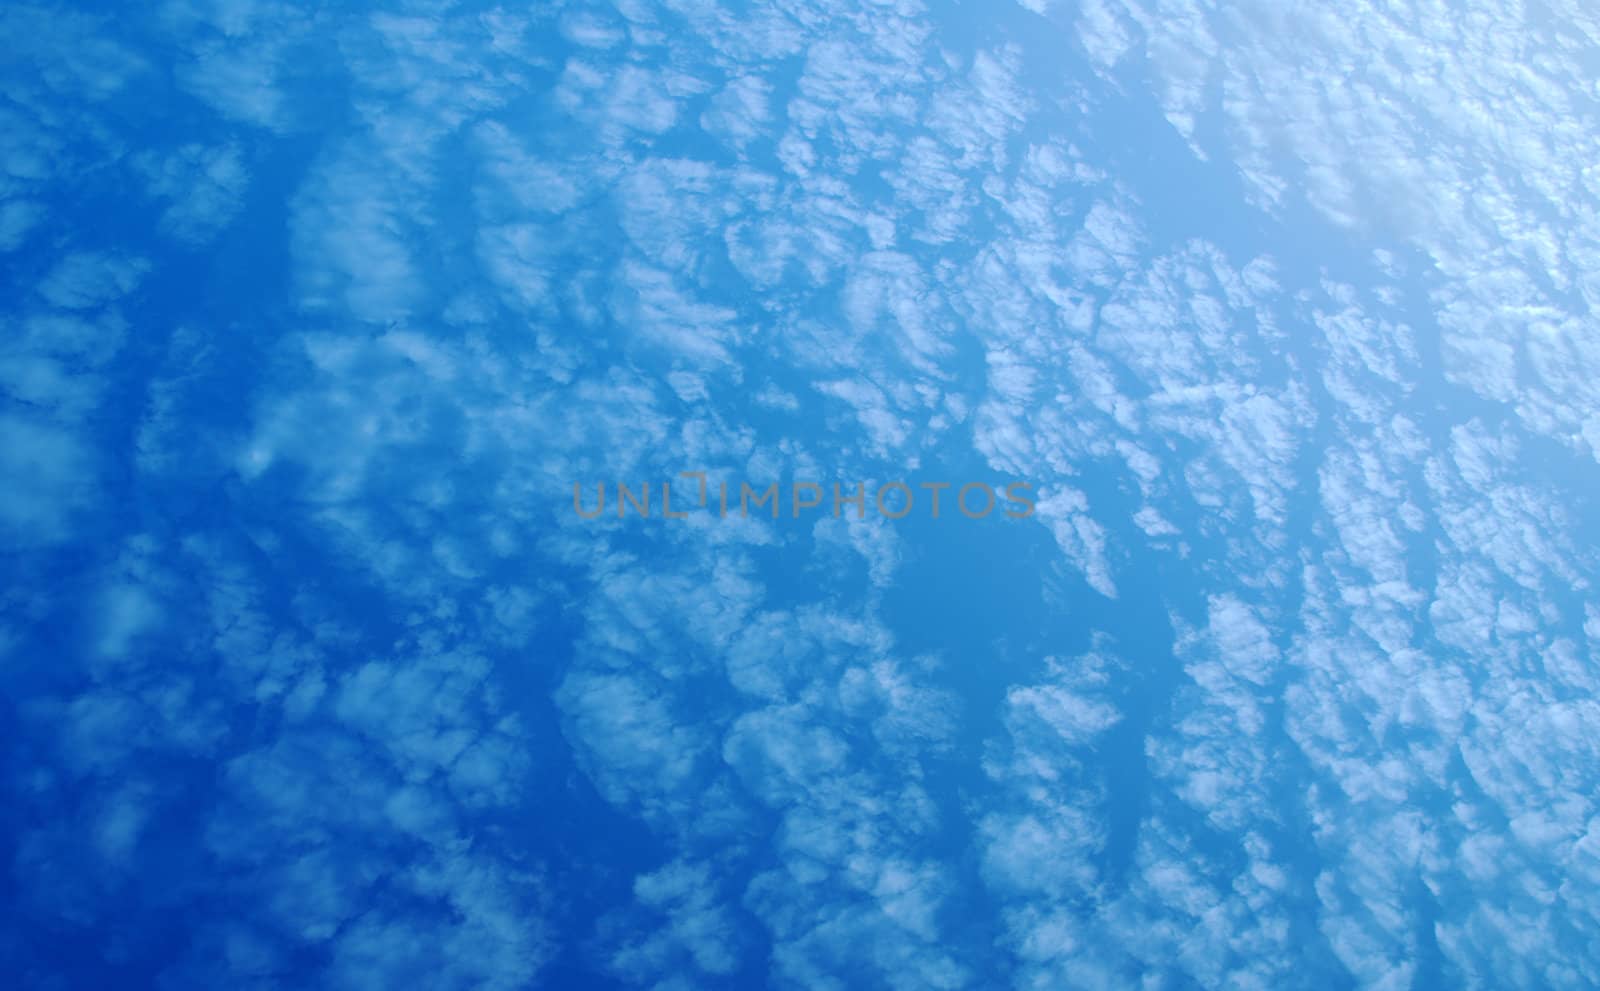 Abstract: Blue sky with white clouds for background 